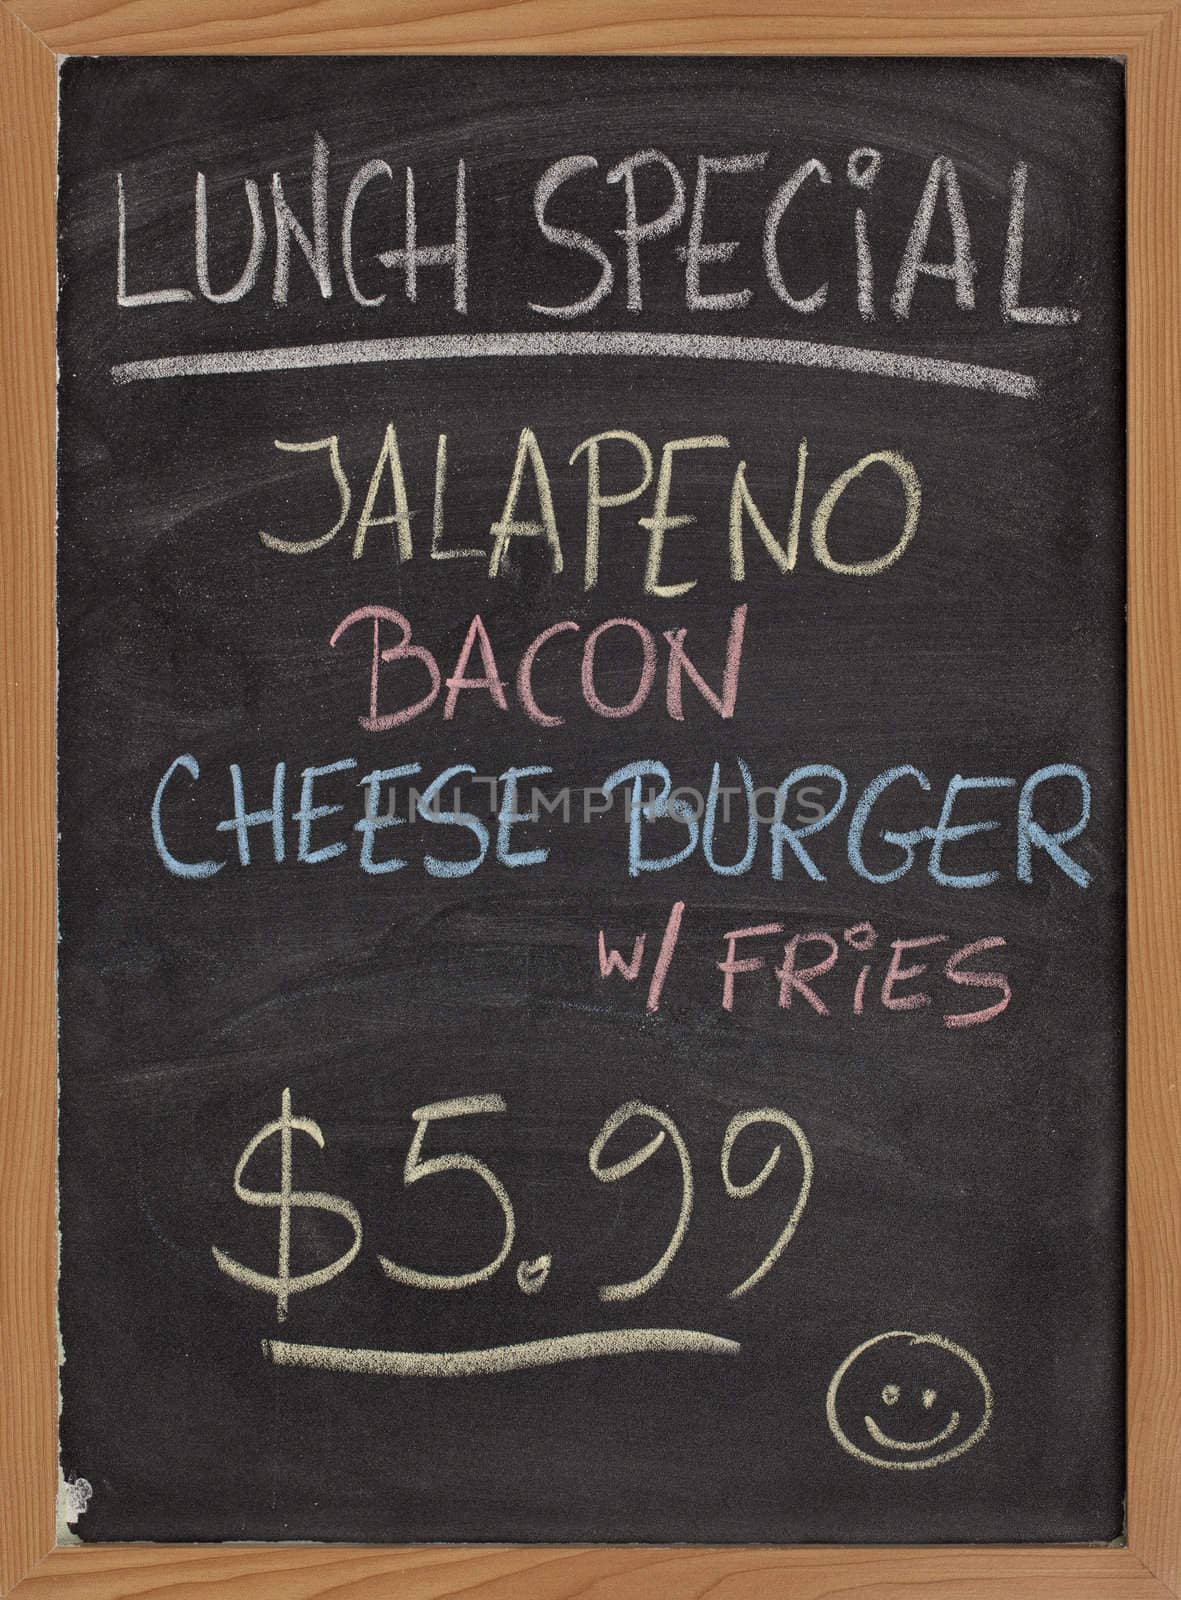 lunch special menu sign by PixelsAway